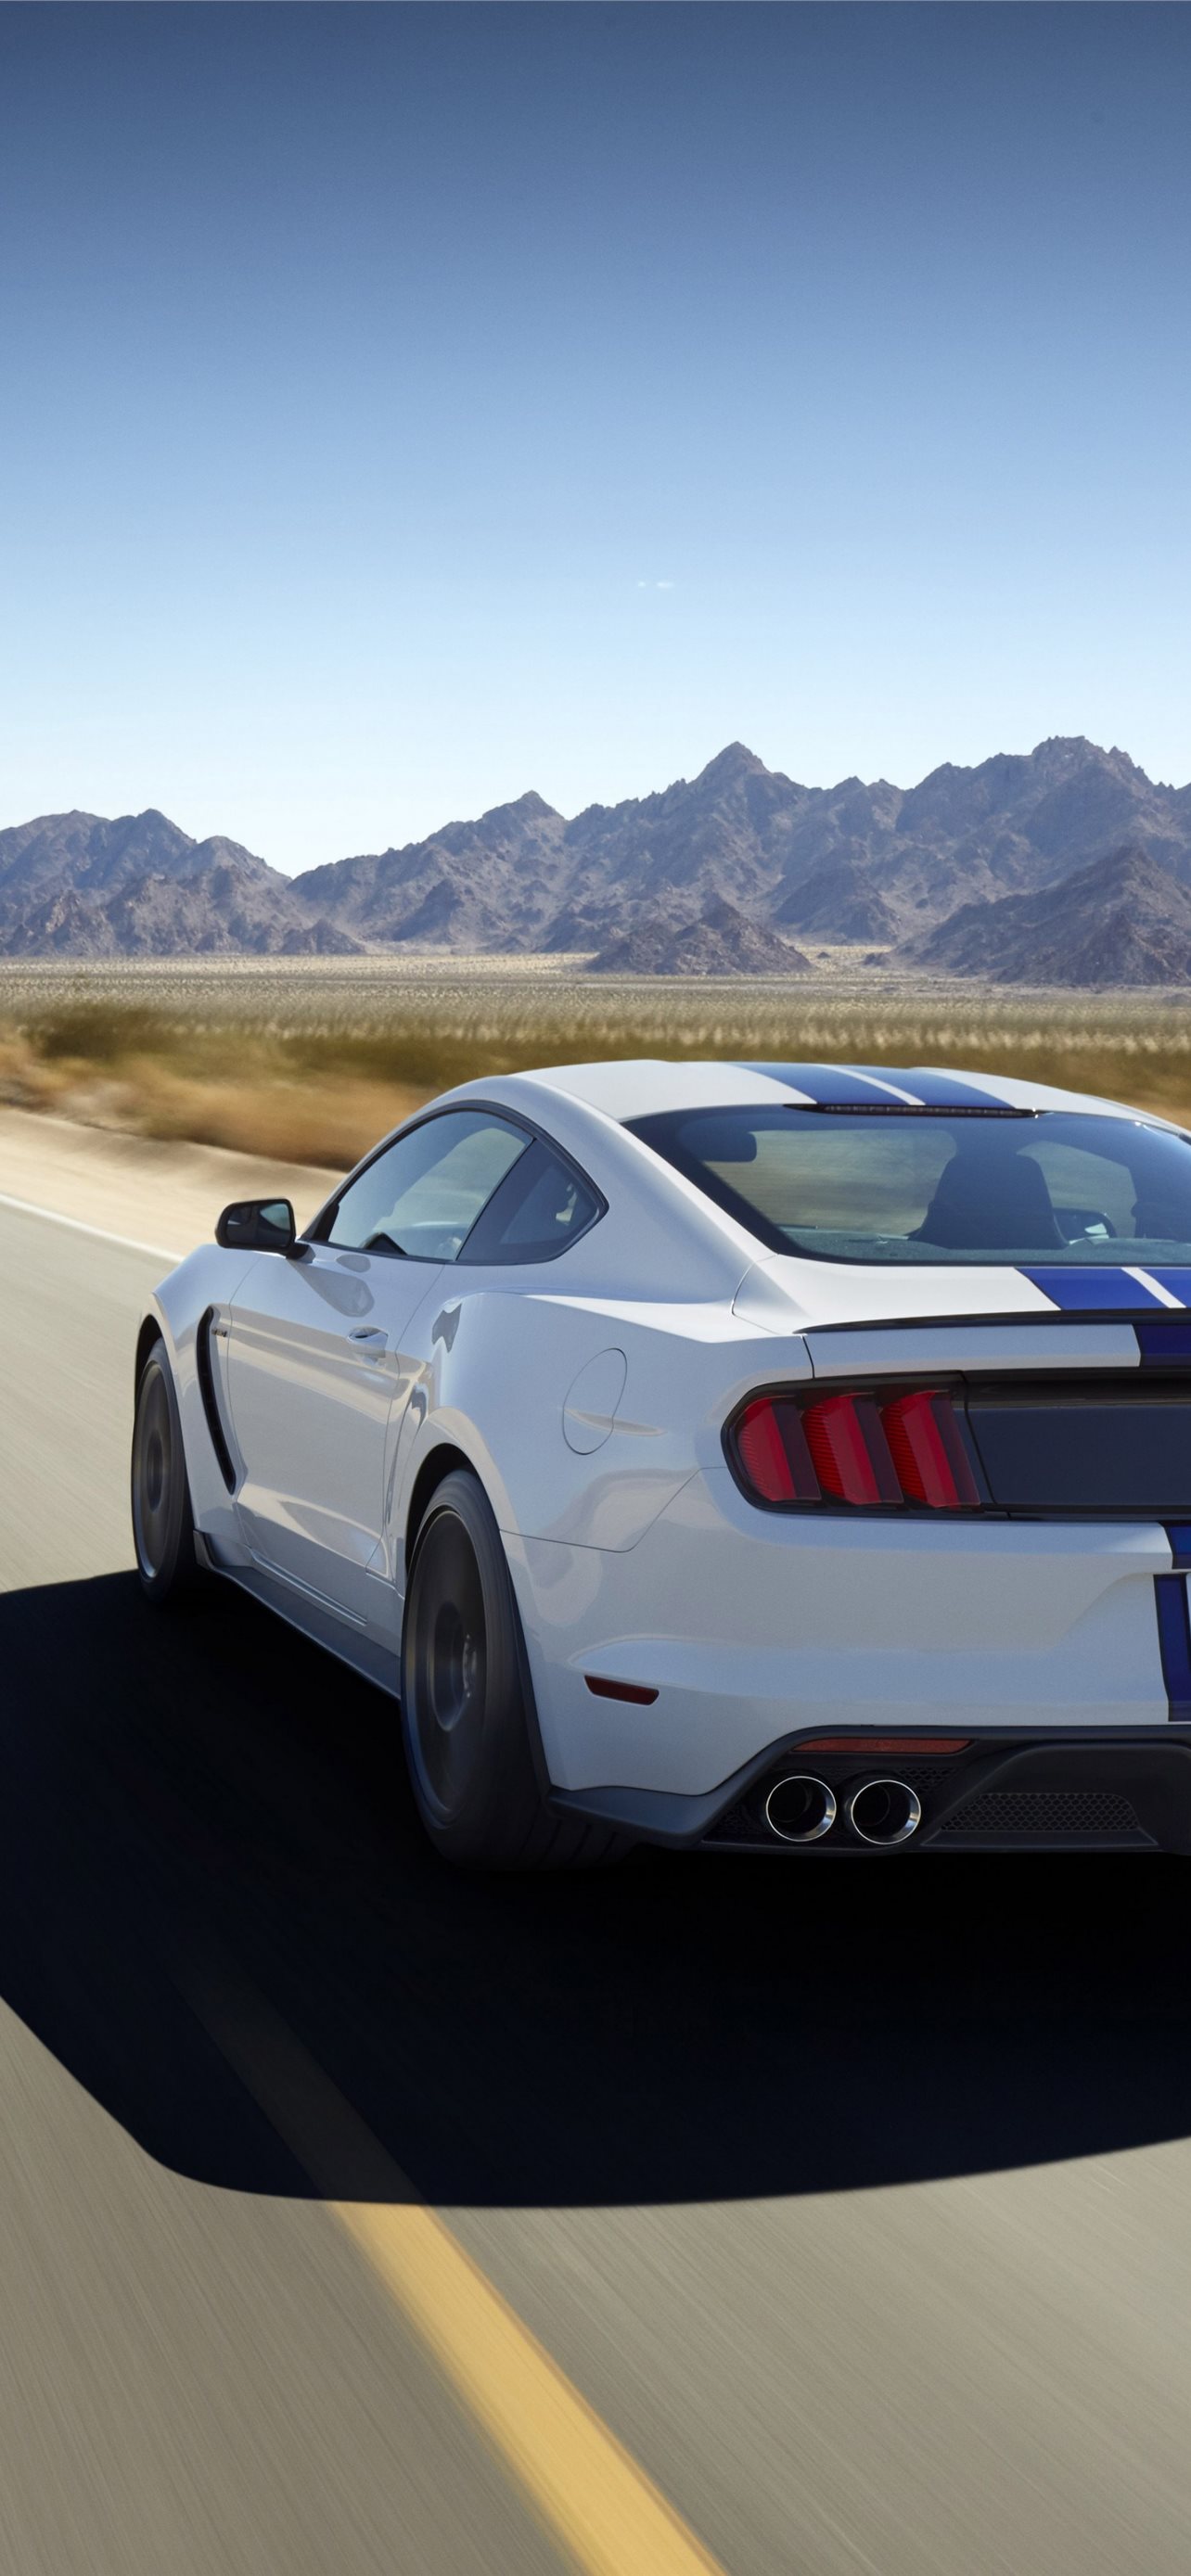 Aggregate More Than Ford Mustang Iphone Wallpaper Super Hot In